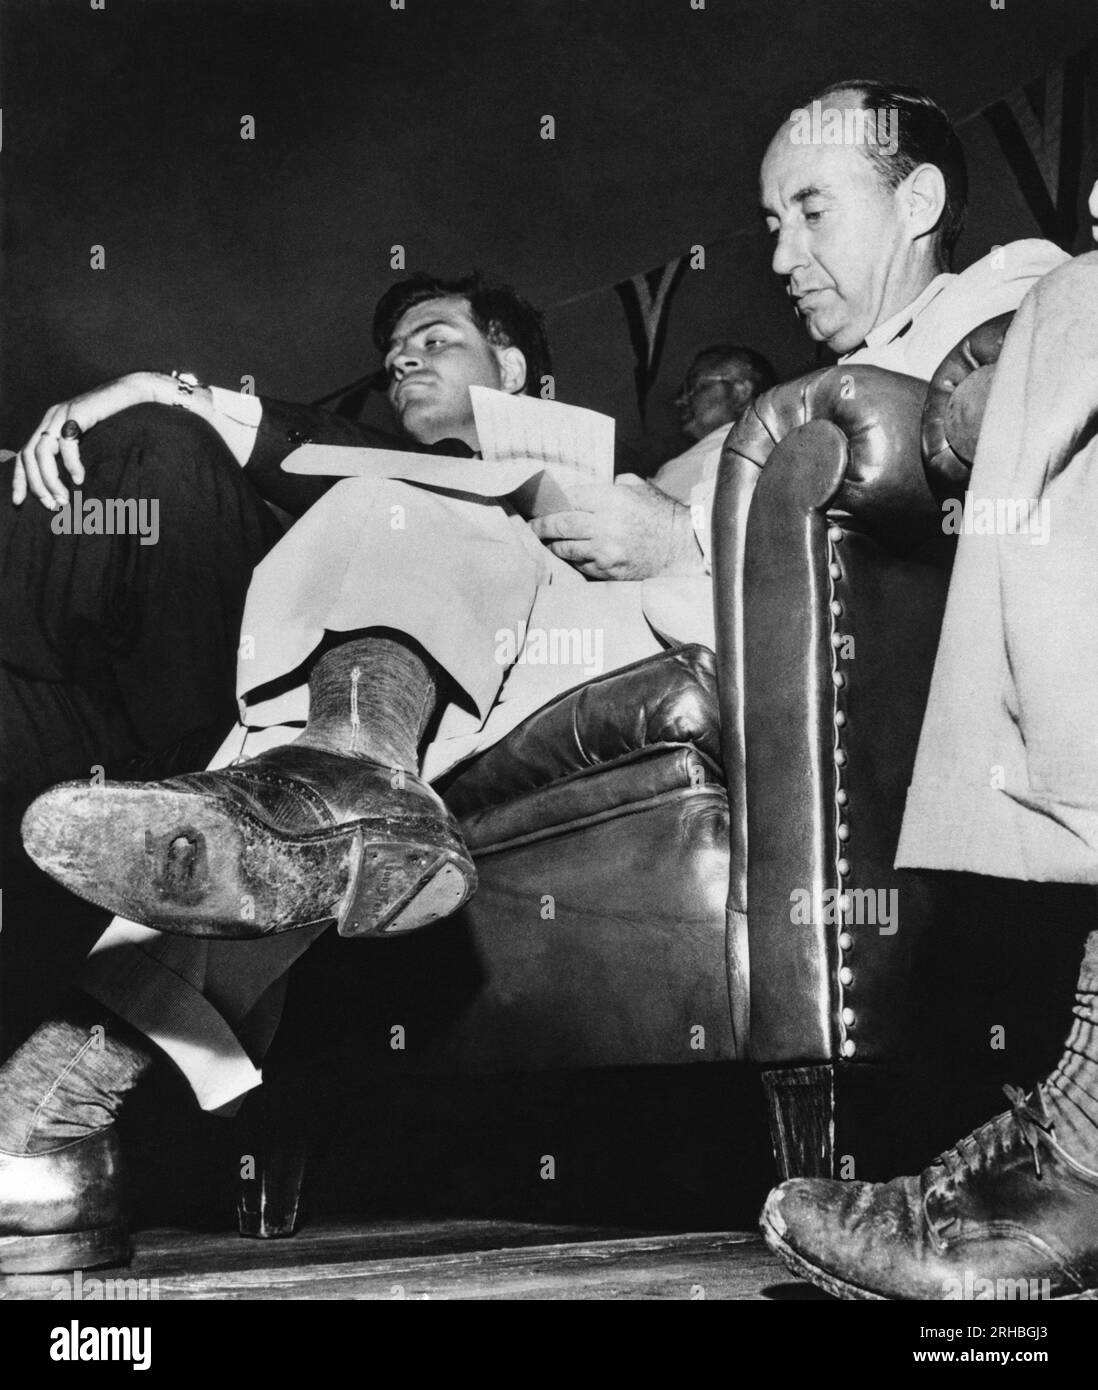 Michigan:  1952 Adlai Stevenson at a Presidential campaign stop in MIchigan whenn he crossed his leg revealing a hole in the sole of his shoe. The photograph won a Pulitzer Prize for photographer William Gallagher. Stock Photo